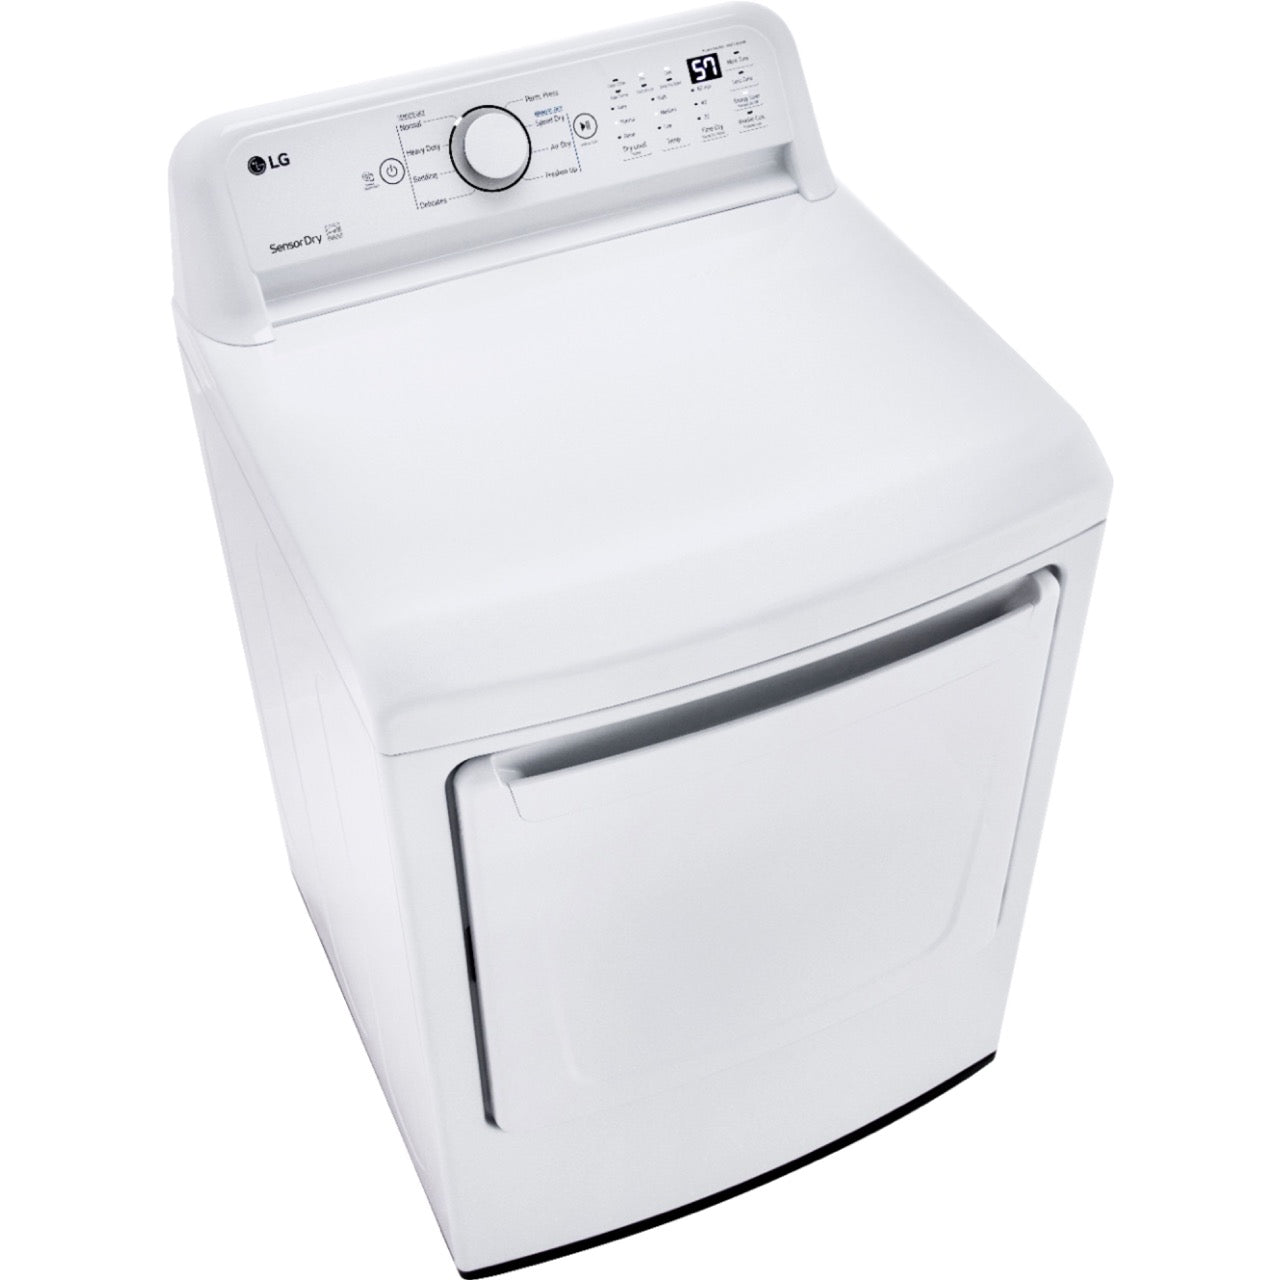 LG 7.3-Cu. Ft. Ultra Large Capacity Electric Dryer with Sensor Dry Technology in White (DLE7000W)